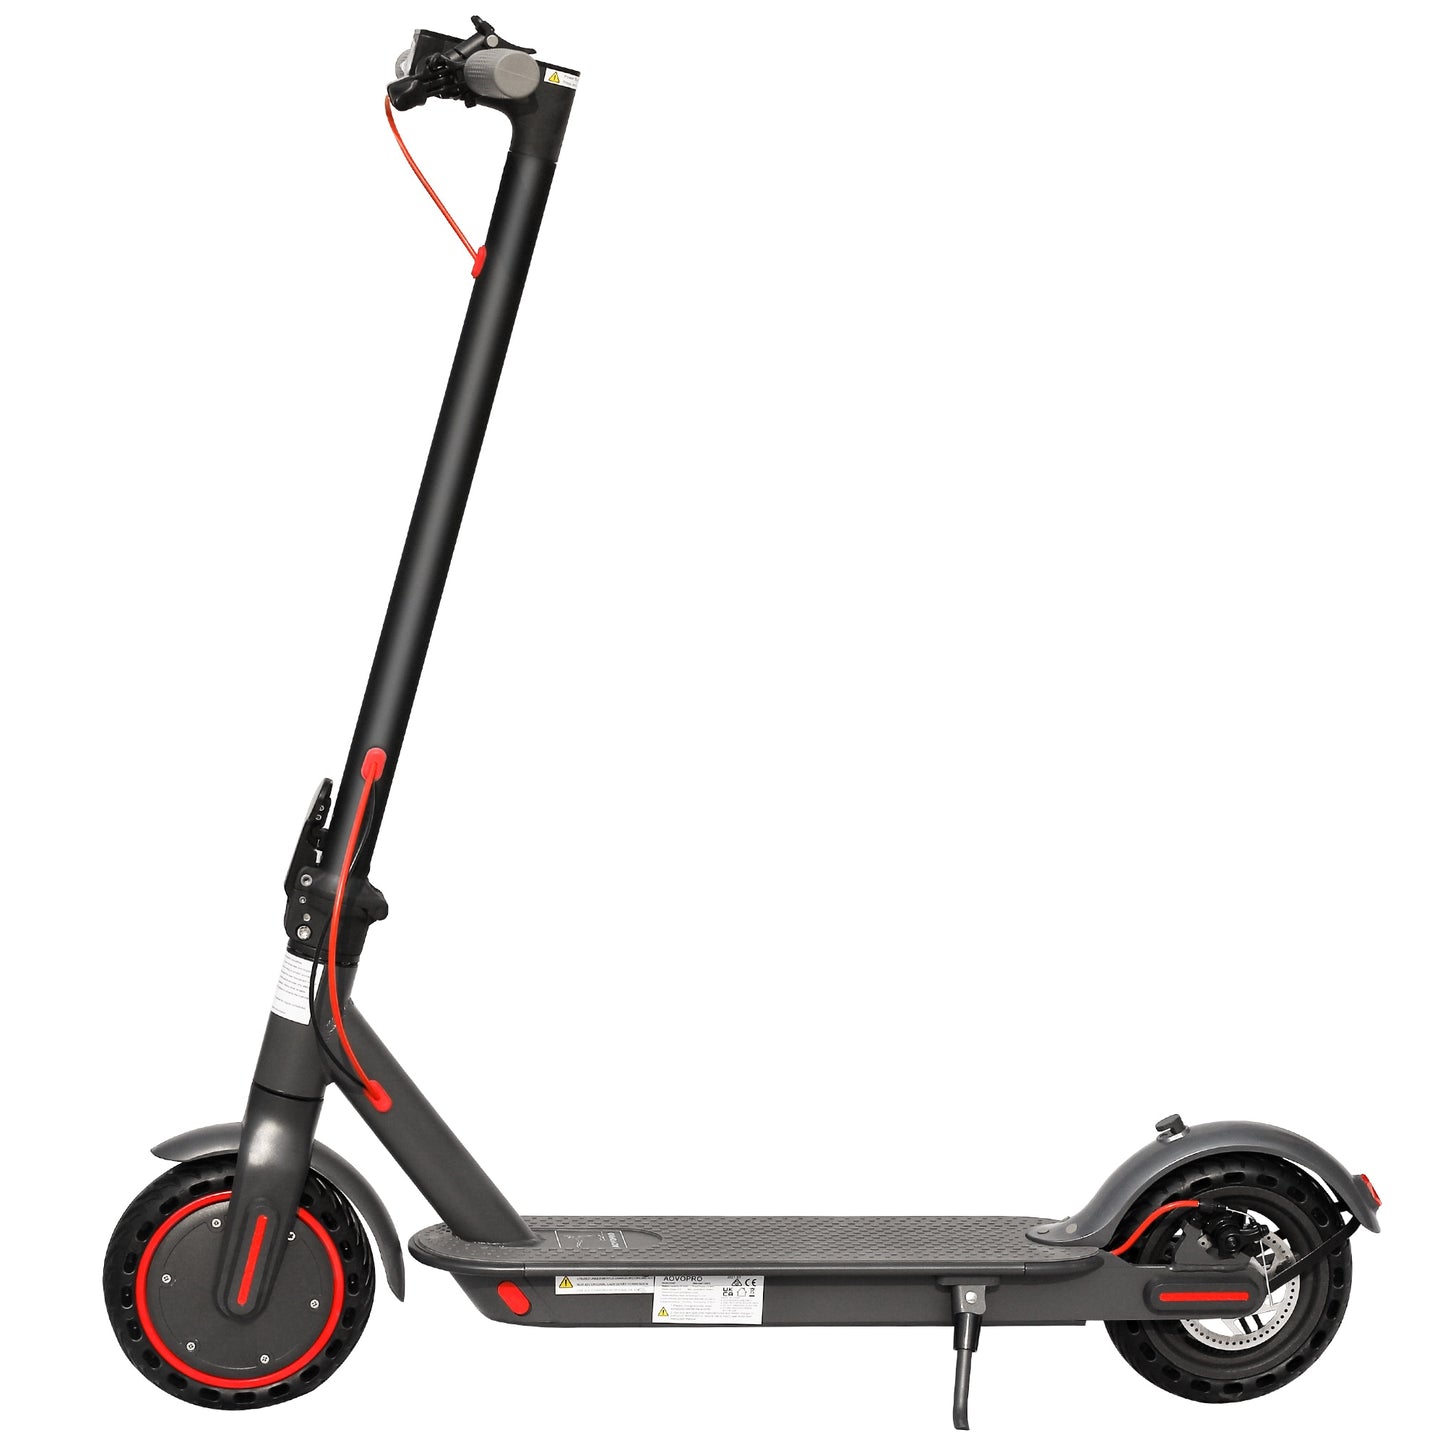 350W AOVOPRO ES80 M365 Electric Scooter